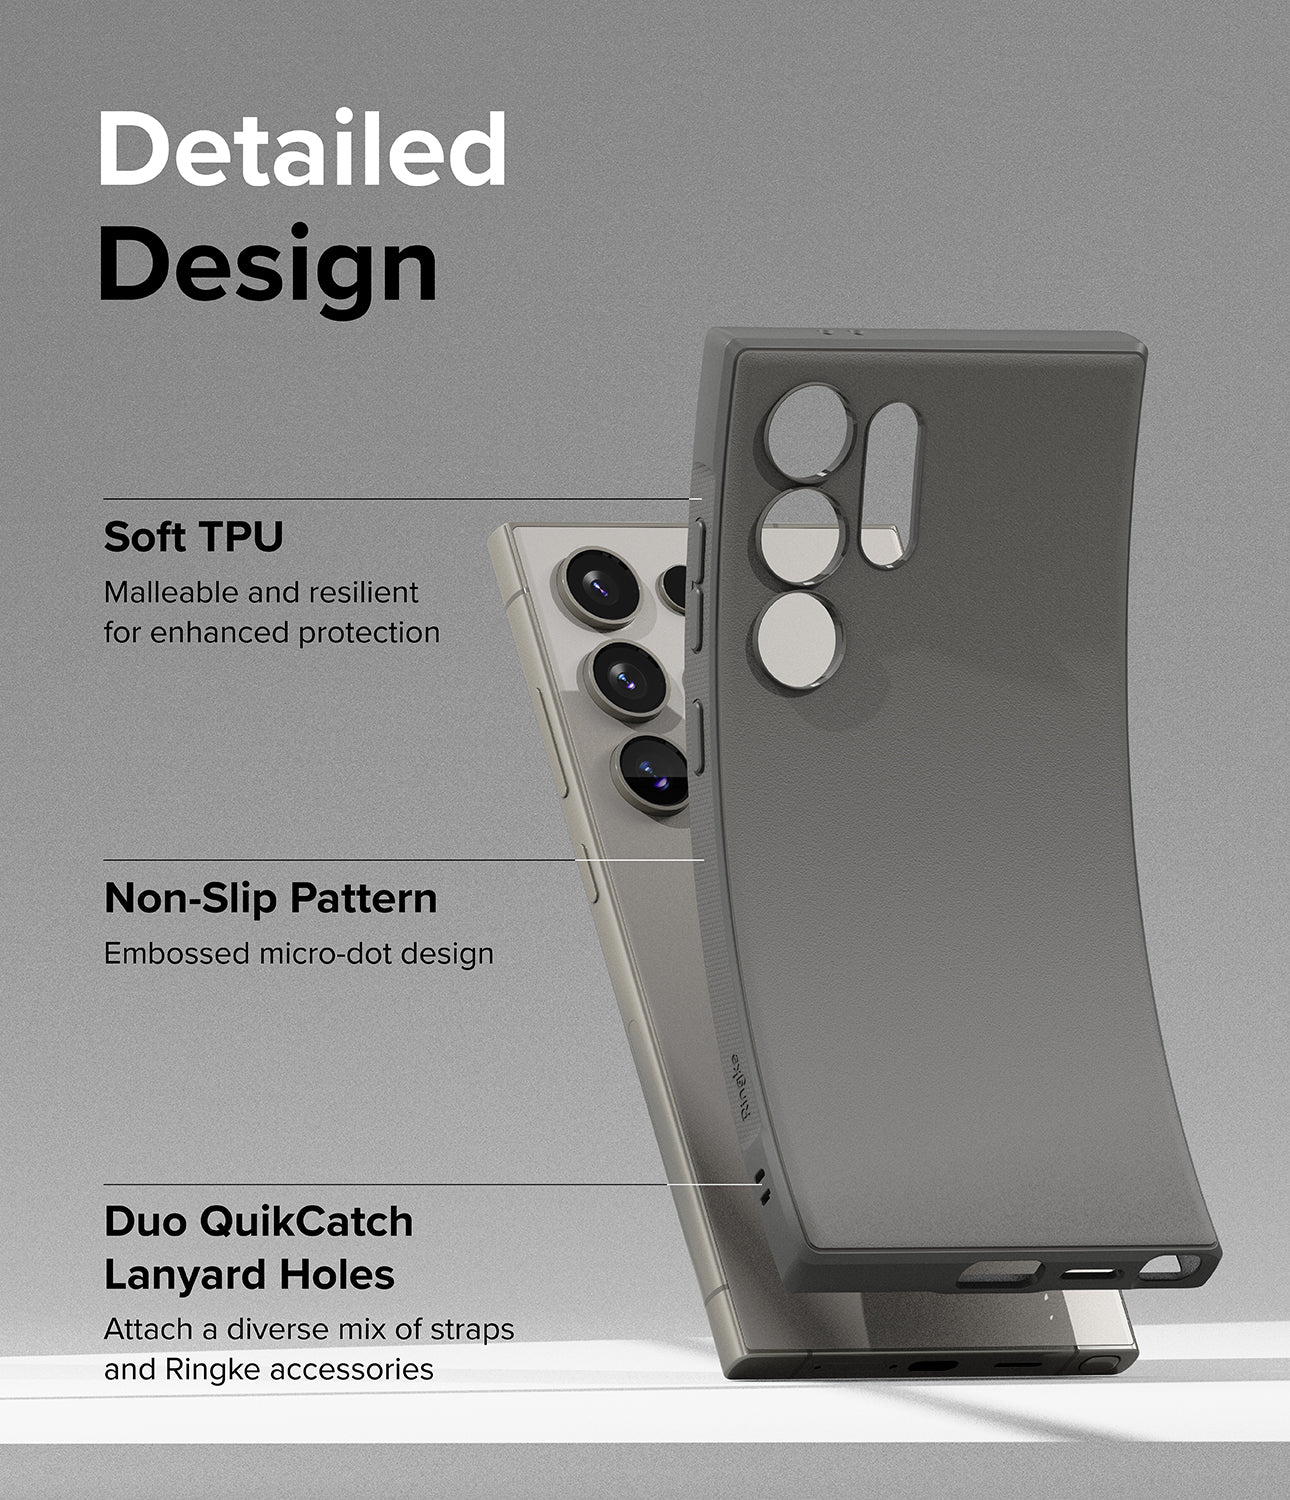 Galaxy S24 Ultra Case | Onyx - Gray - Detailed Design. Malleable and resilient for enhanced protection with Soft TPU. Embossed micro-dot design with Non-Slip Pattern. Attach a diverse mix of straps and Ringke accessories with Duo QuikCatch Lanyard Holes.